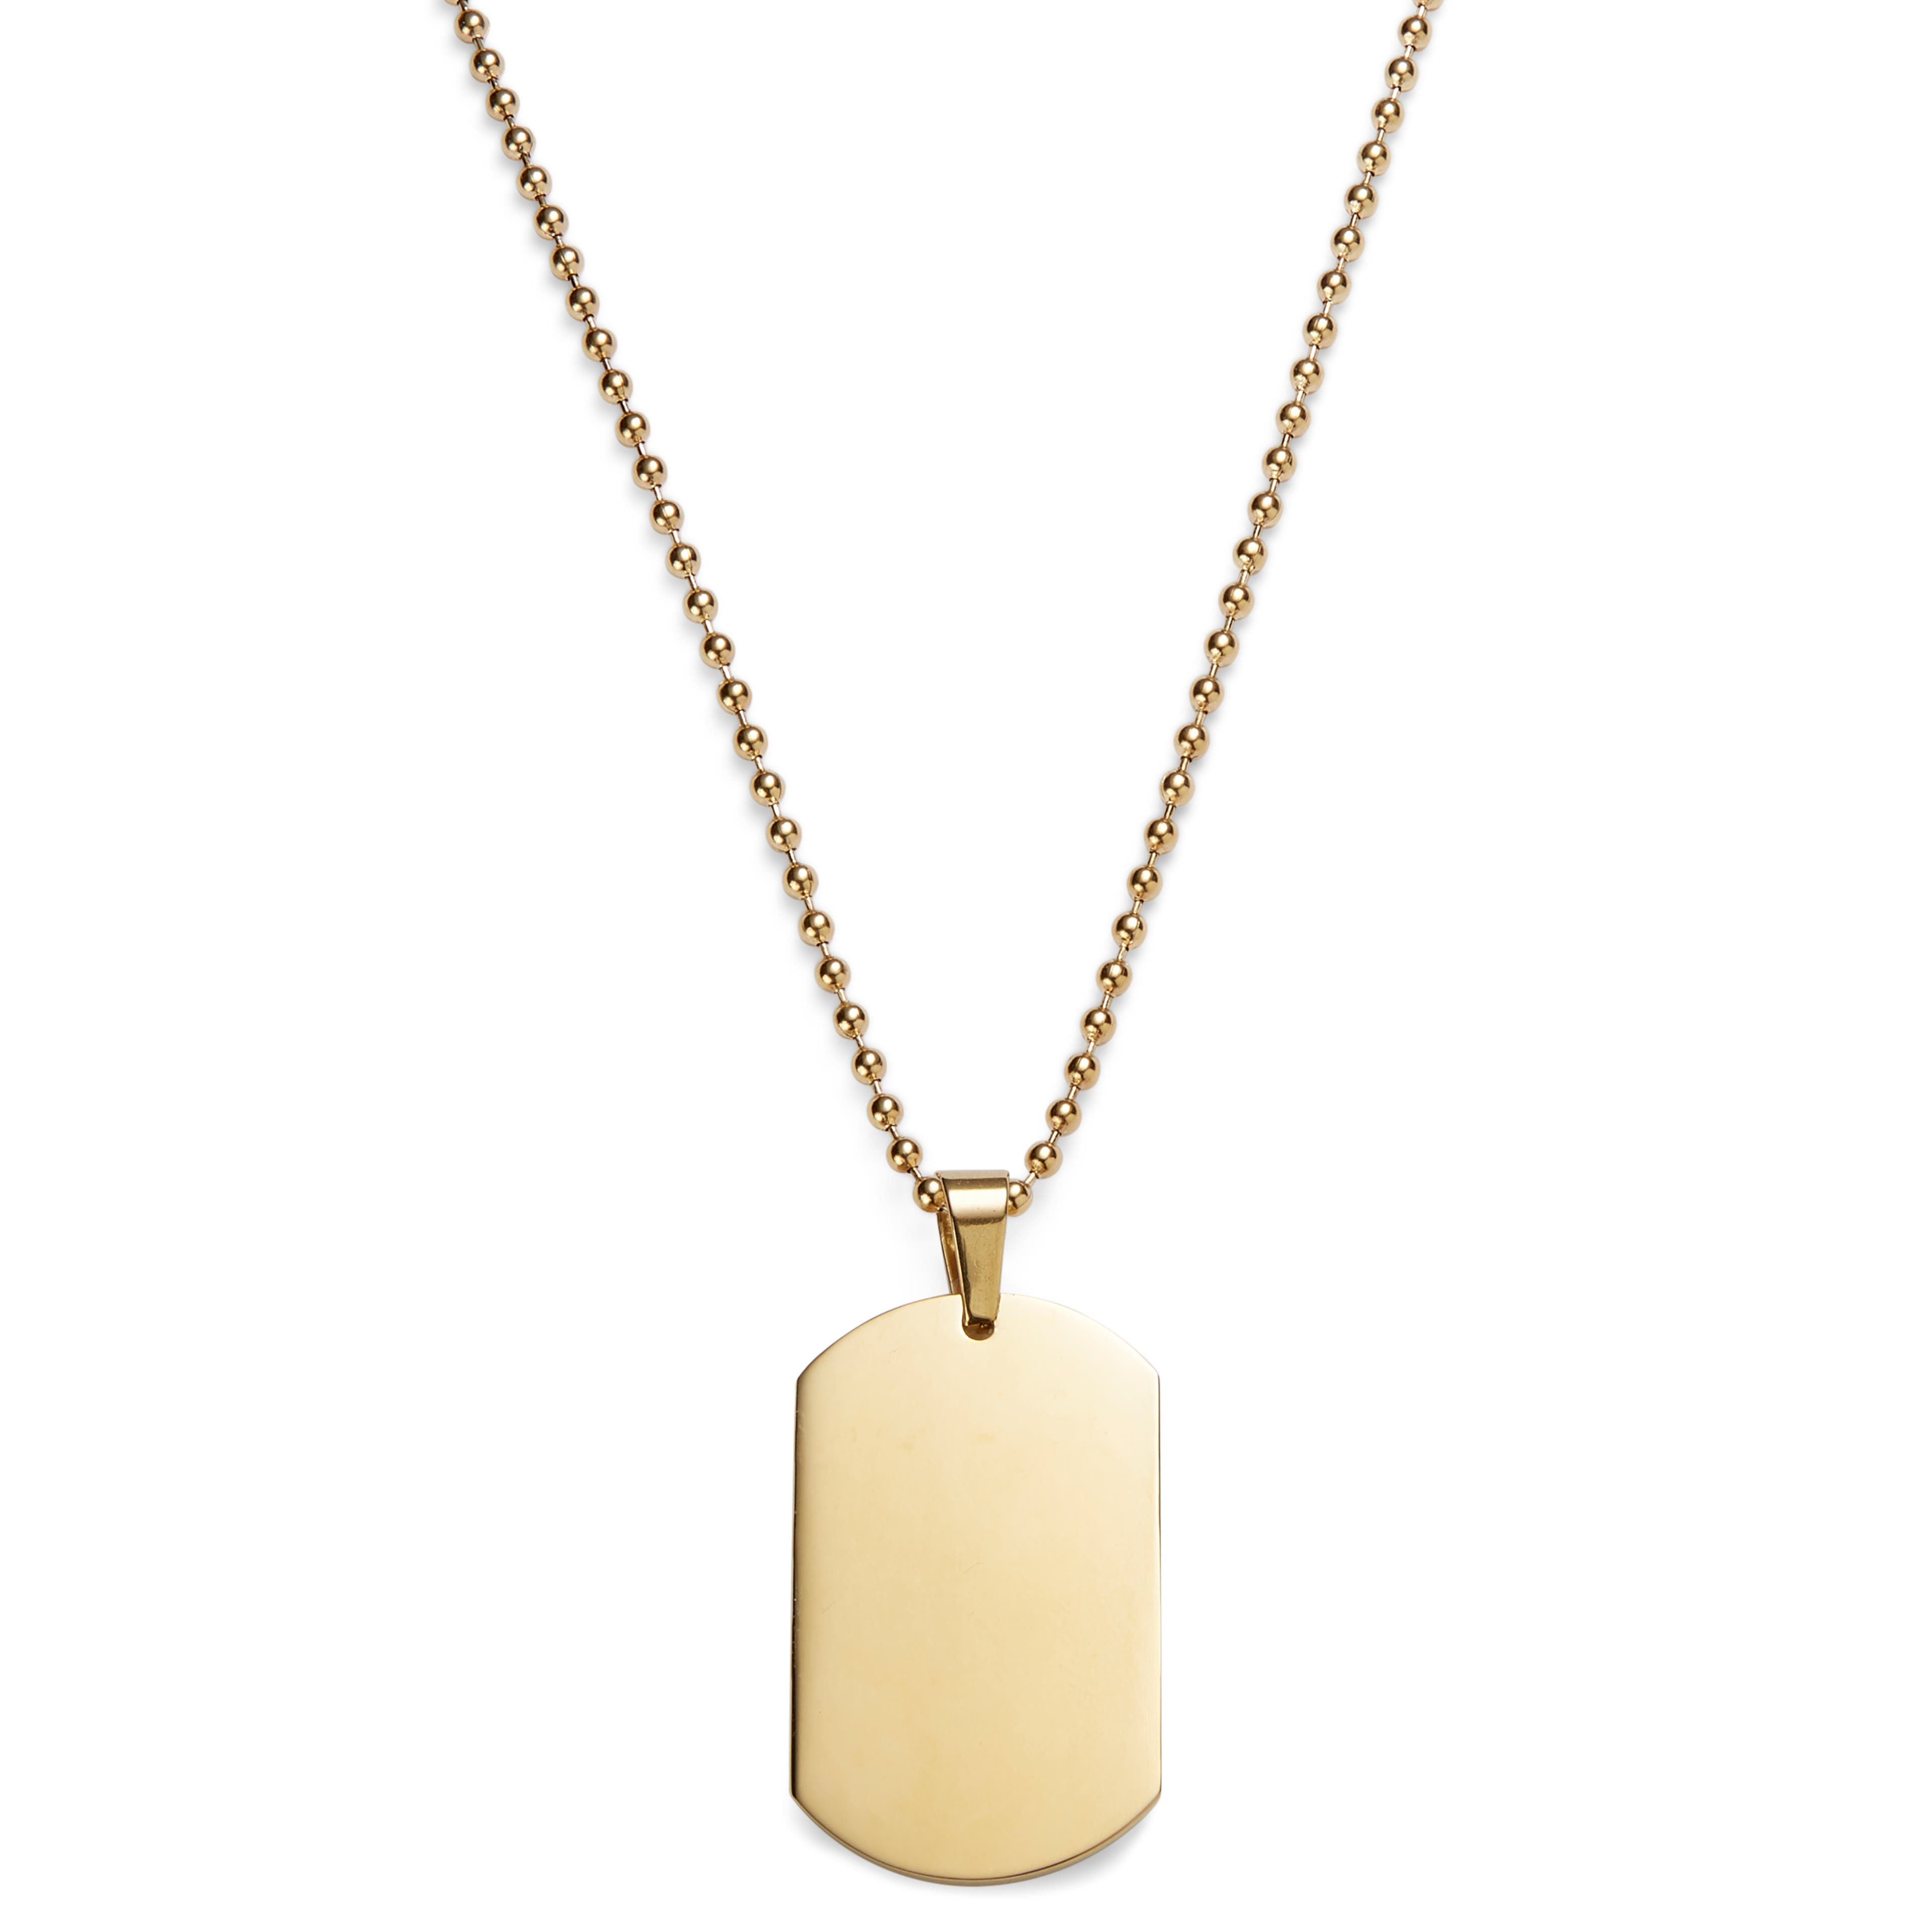 Gold-Tone Dog Tag Necklace